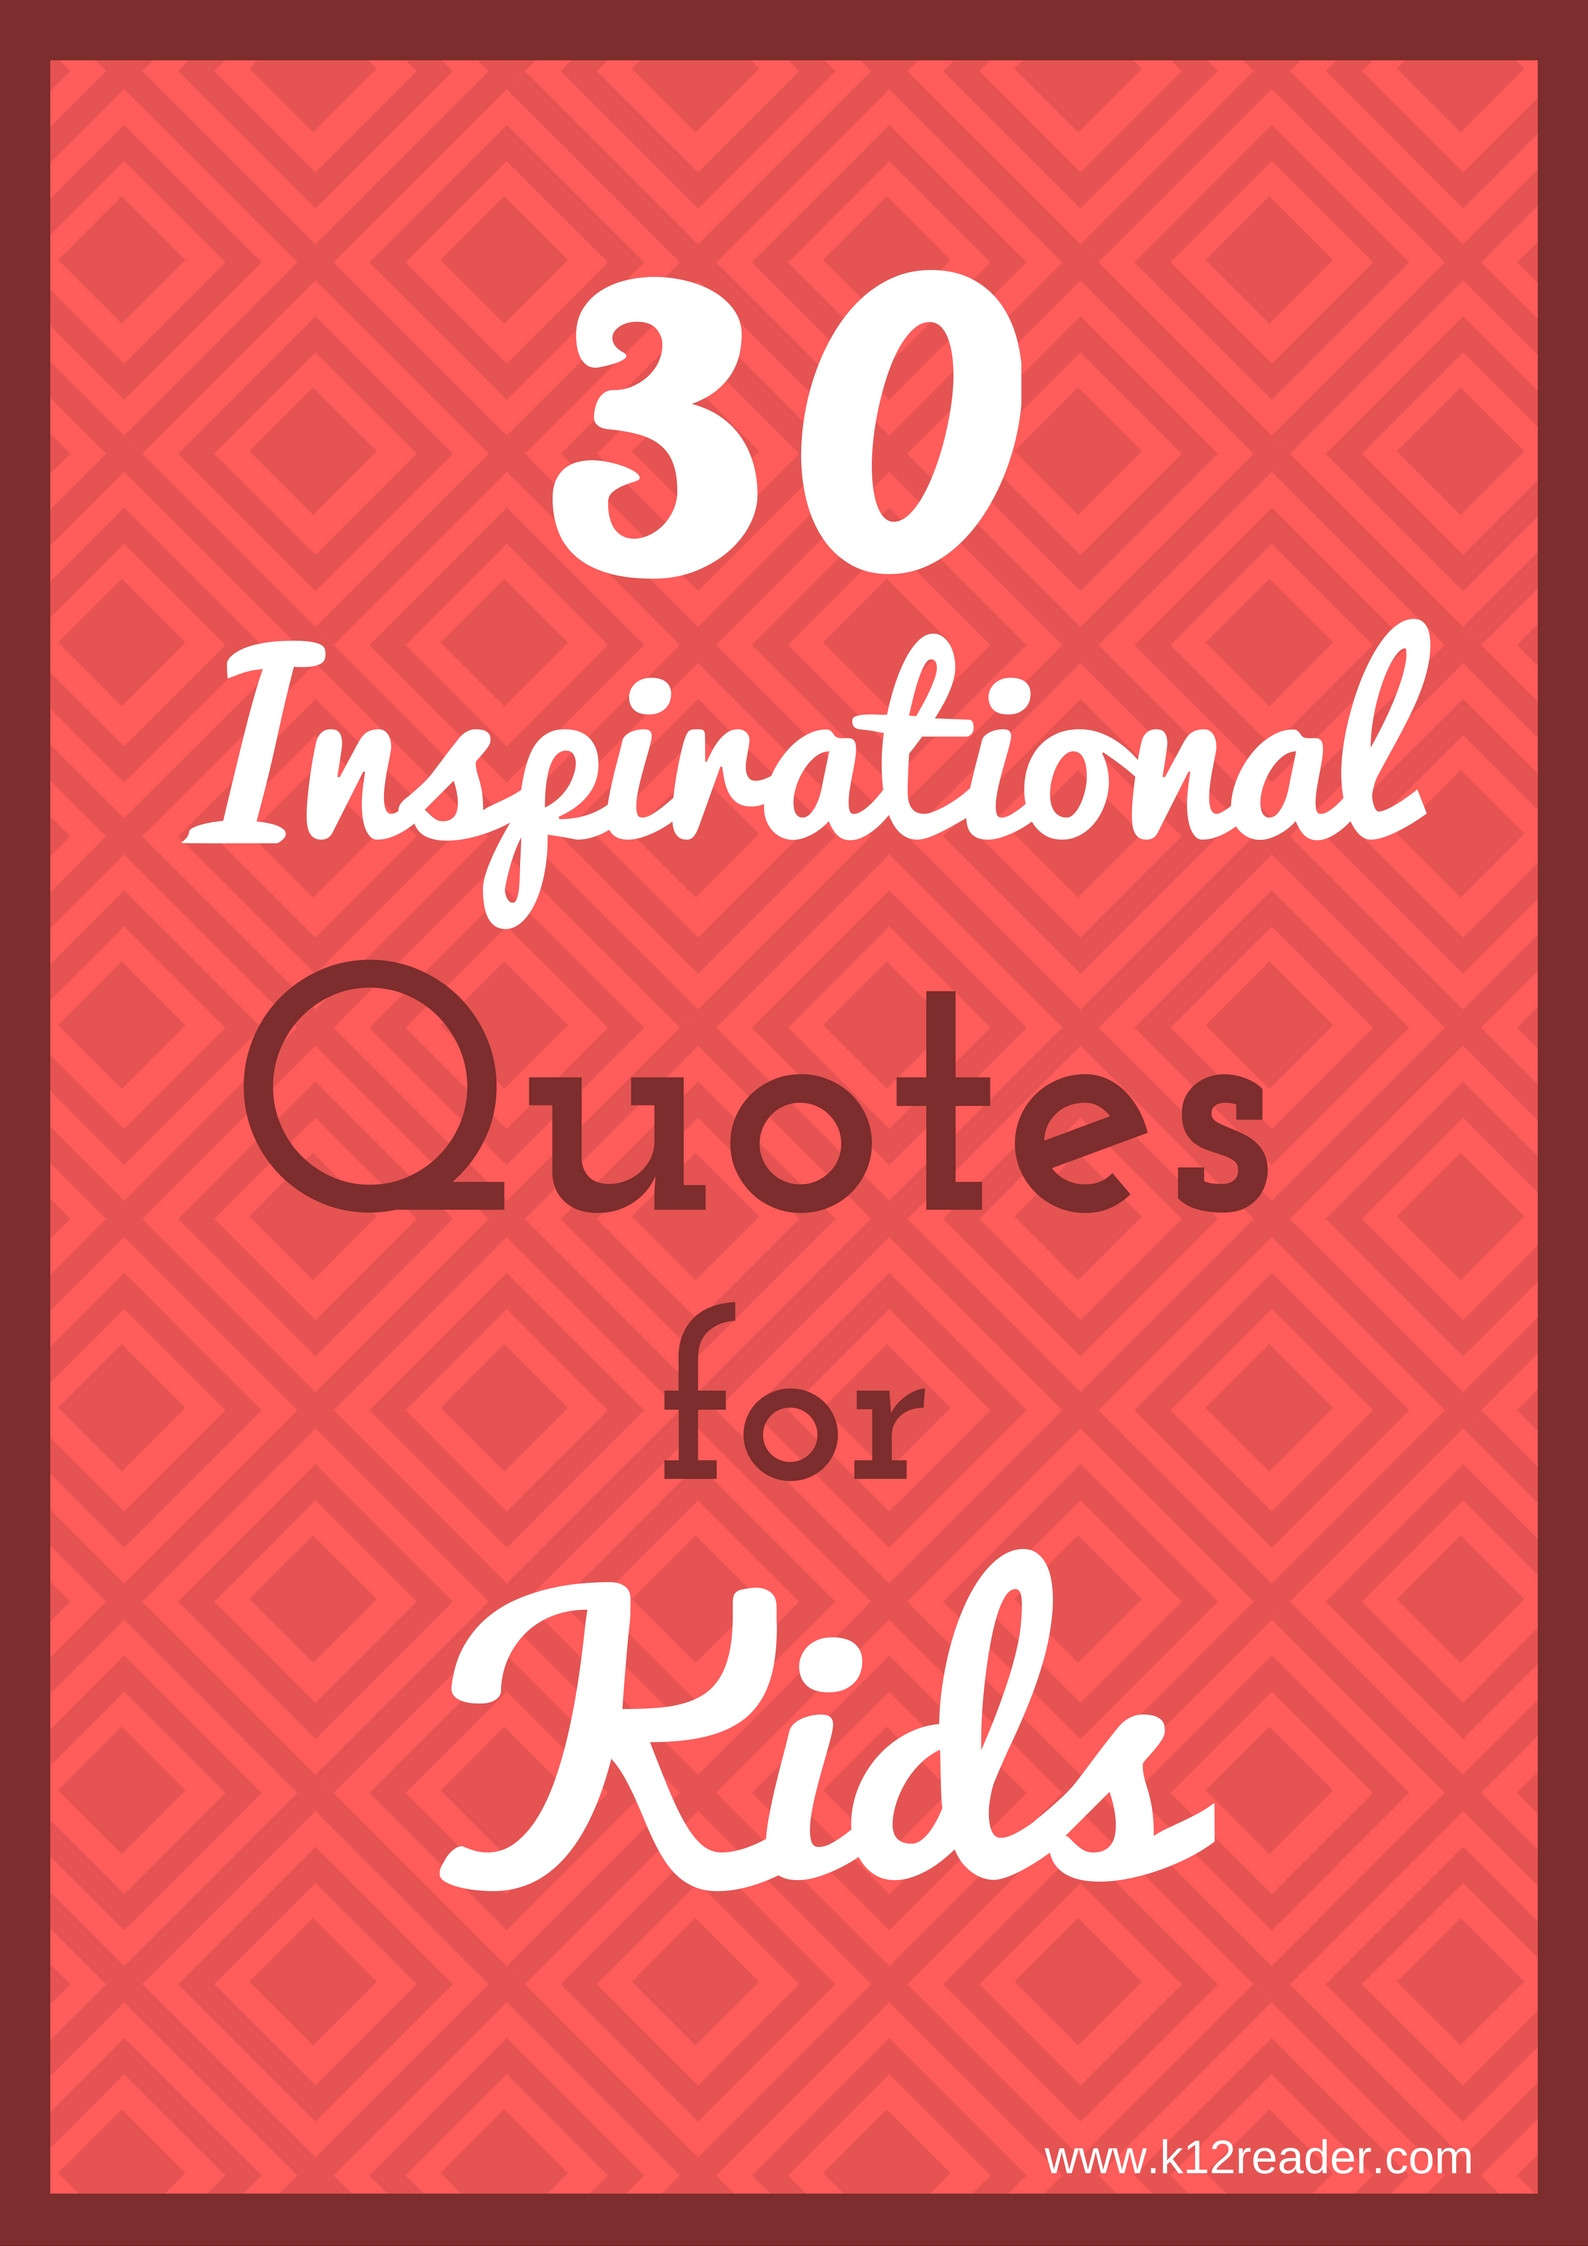 Motivational Kids Quotes
 30 Inspirational Quotes for Kids